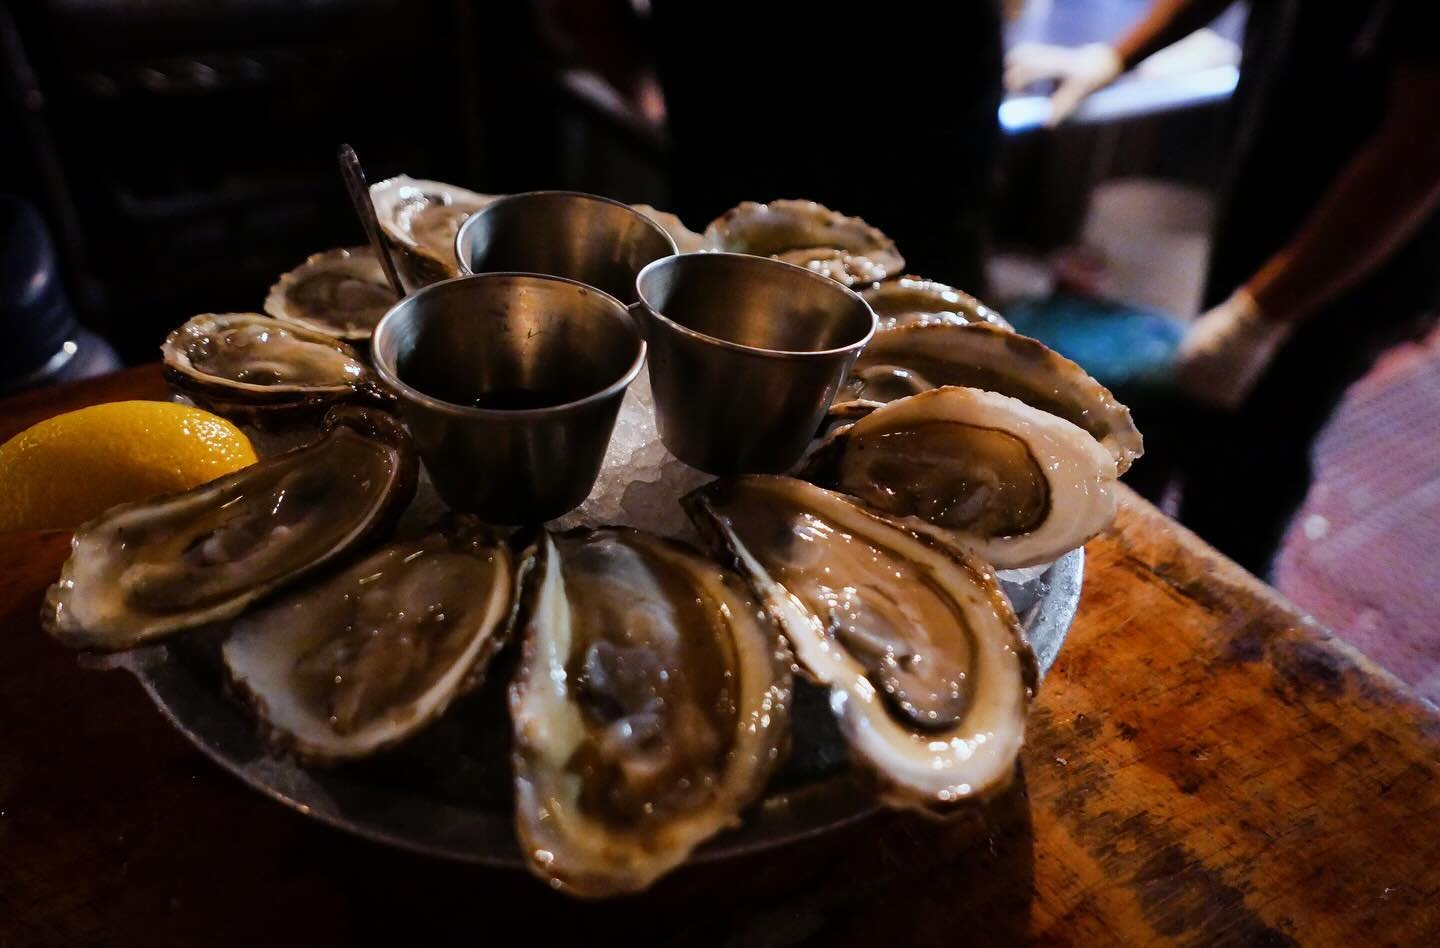 Start your weekend the right way! Stop by for a cold NYS Craft Beer and fresh oysters. Happy Hour 5pm-7pm. $12 for 6 assorted oysters and a beer! #upstatecraftbeerandoysterbar #nycoysters #oysterhappyhour #nycrestaurants #nycfoodies